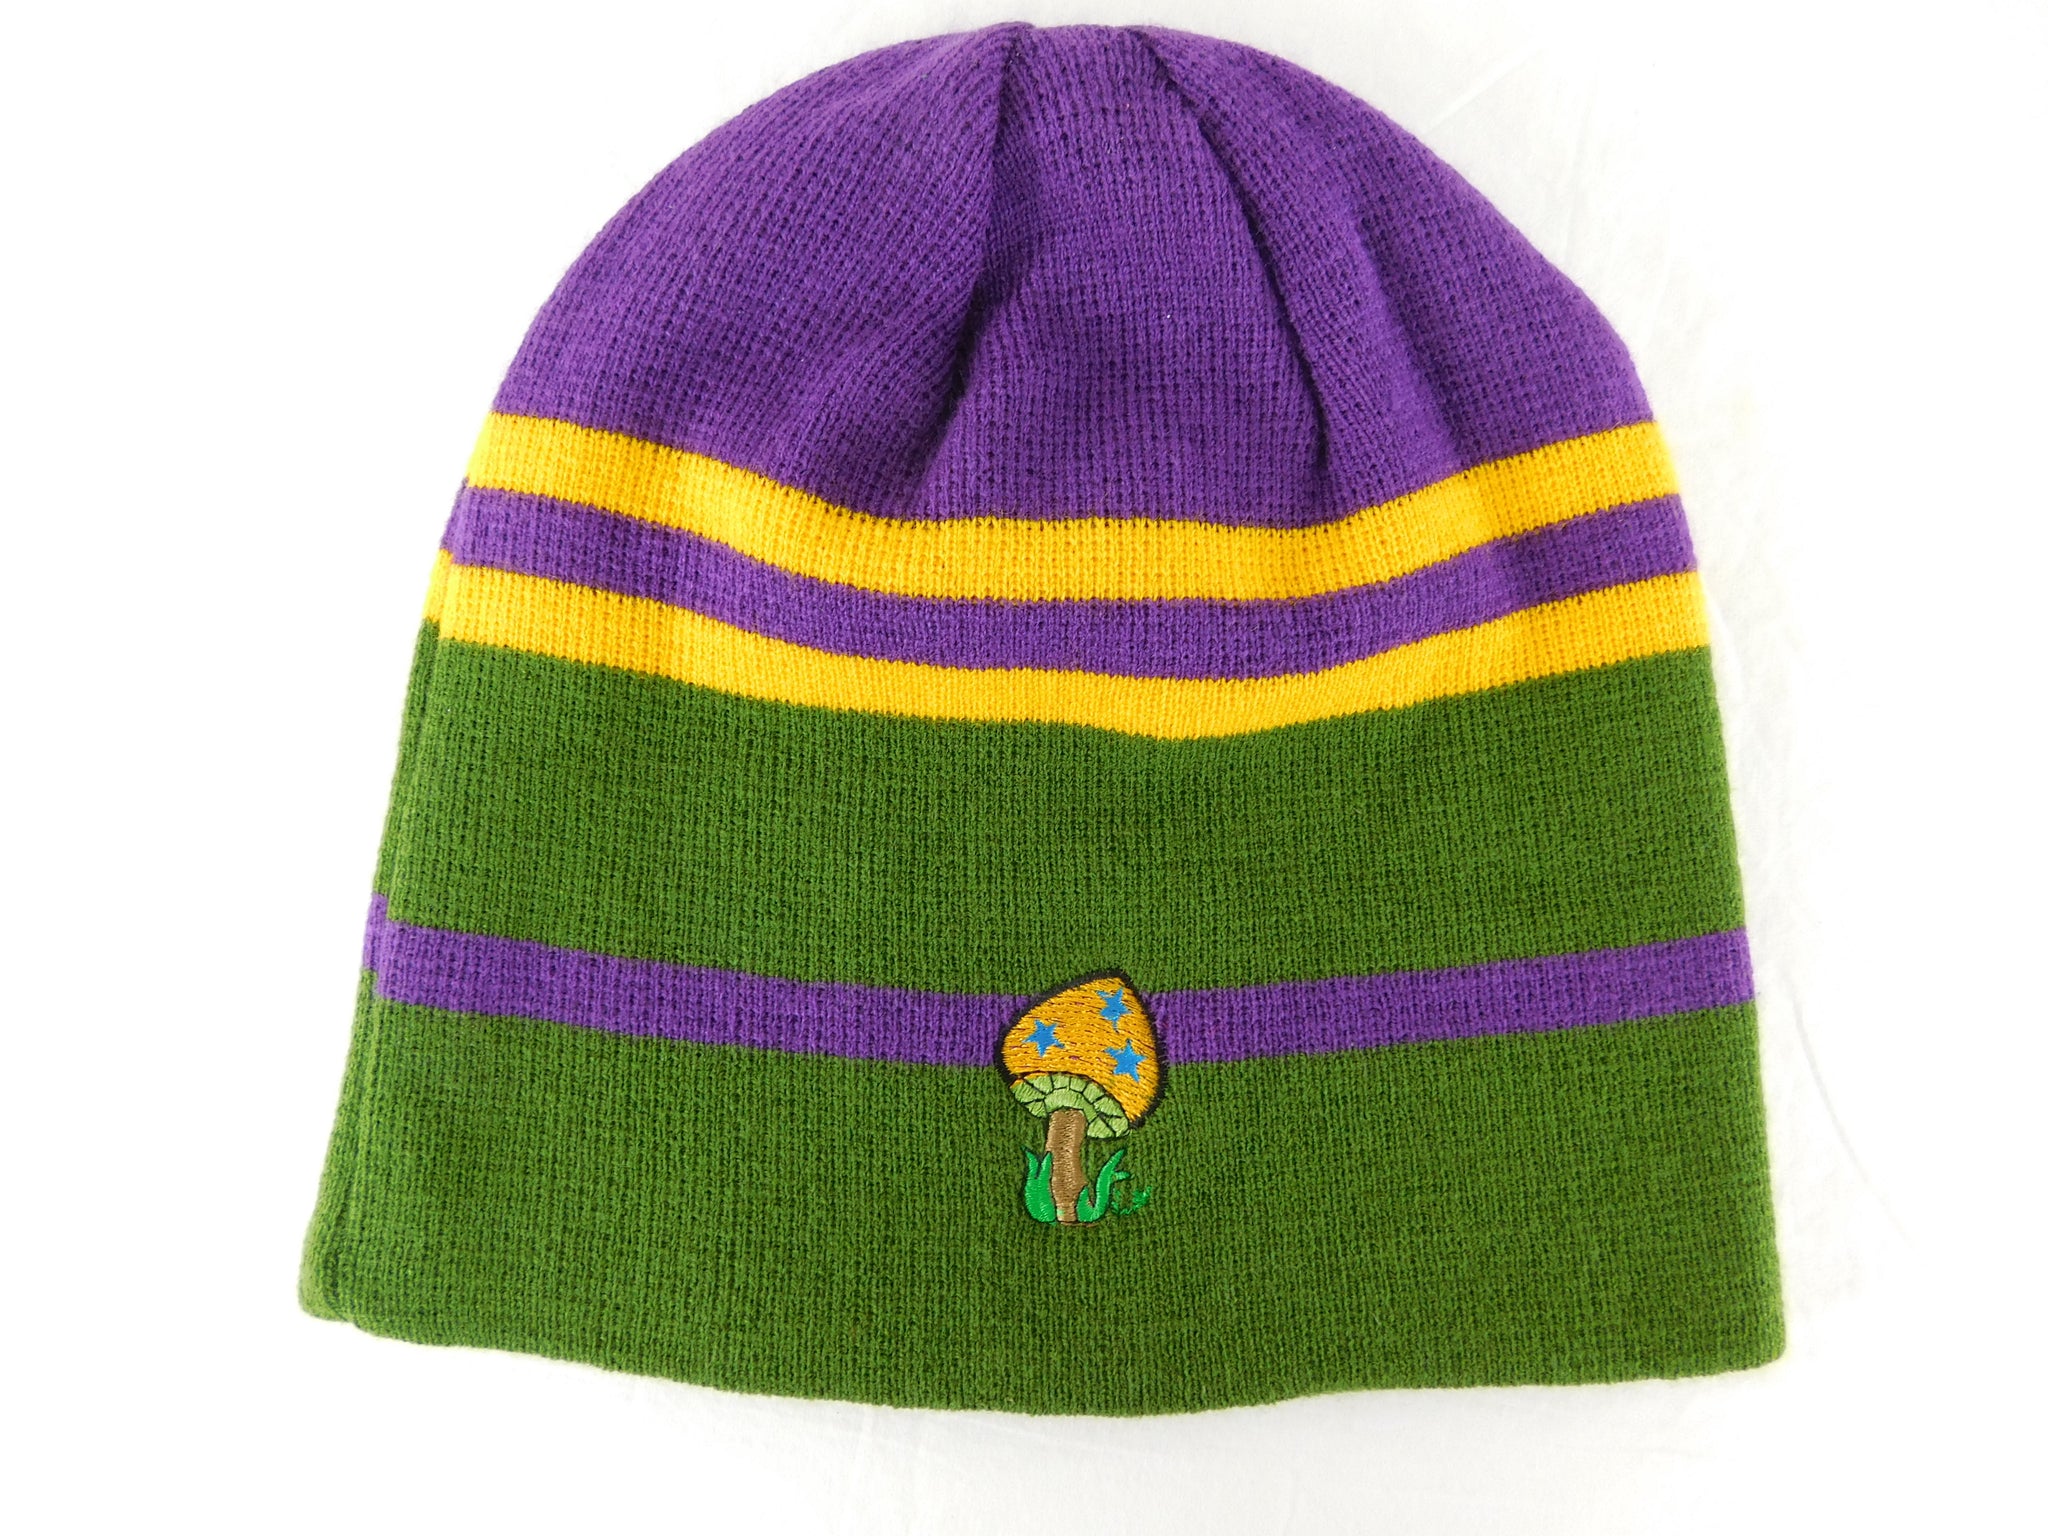 Knit Cap in Mardi Gras Colors with Mushroom Embroidery